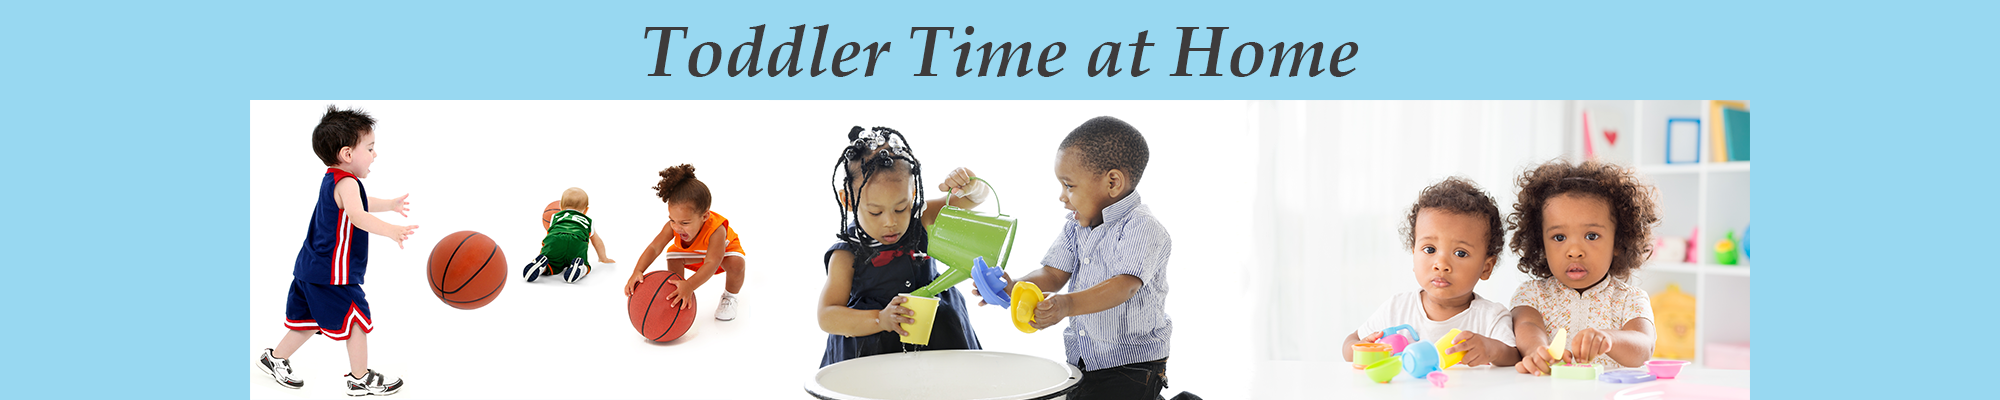 Toddler Time at Home image